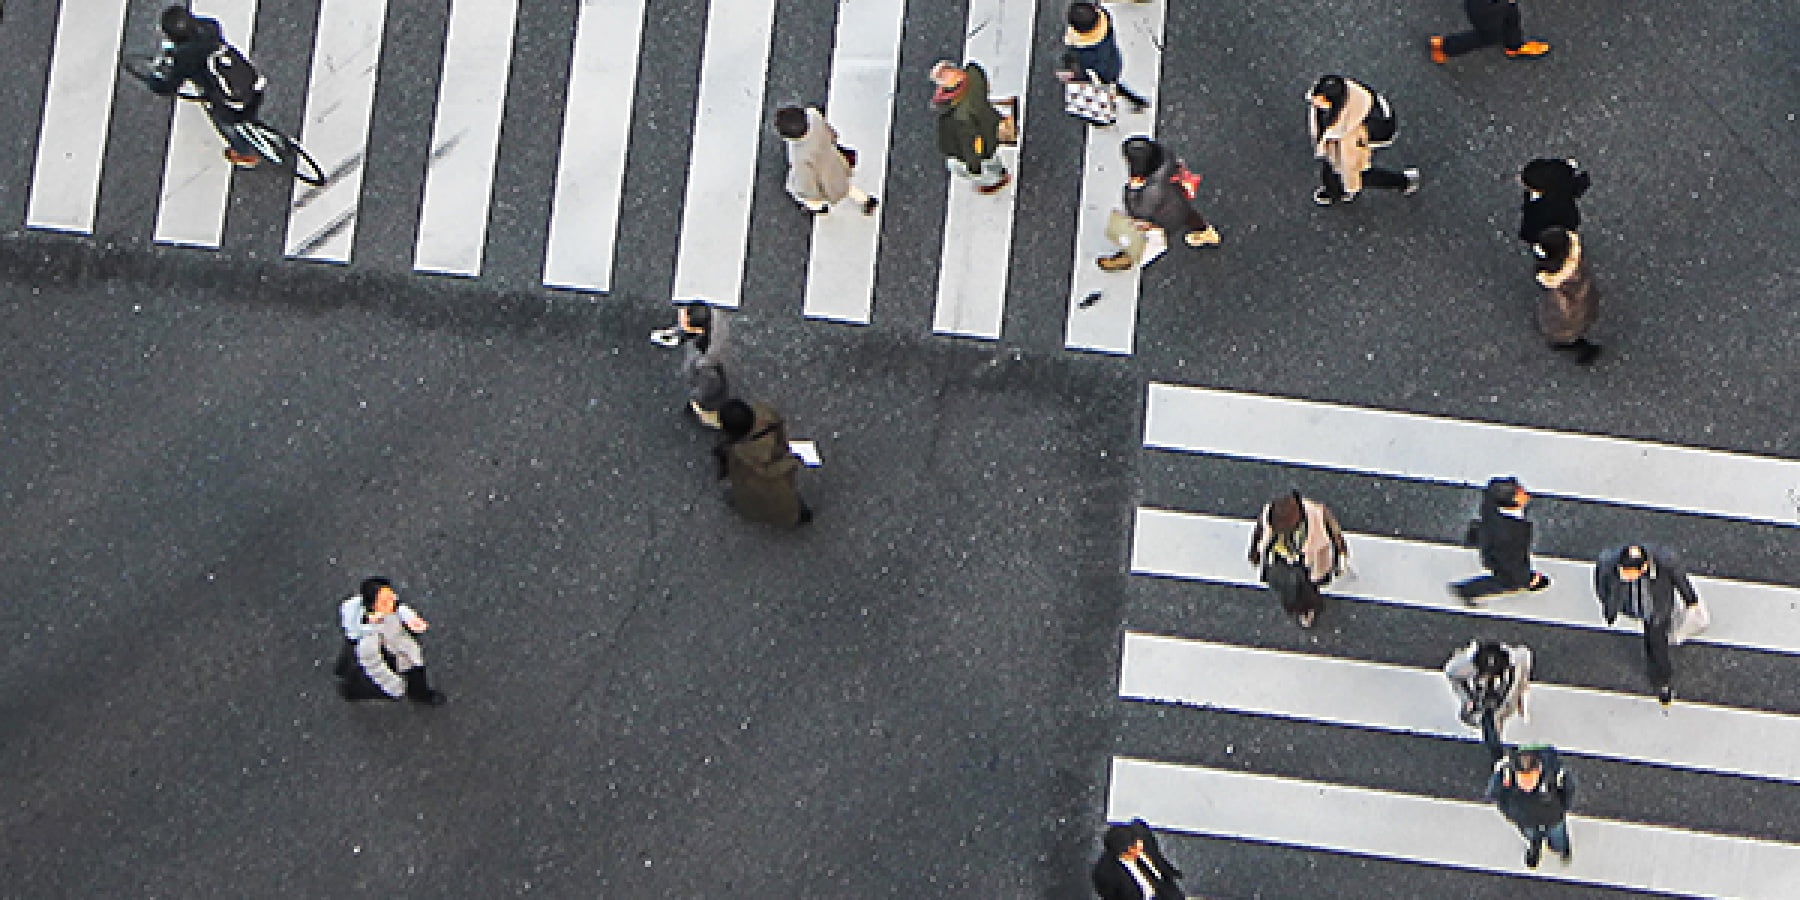 Top down image of people on a zebra crossing